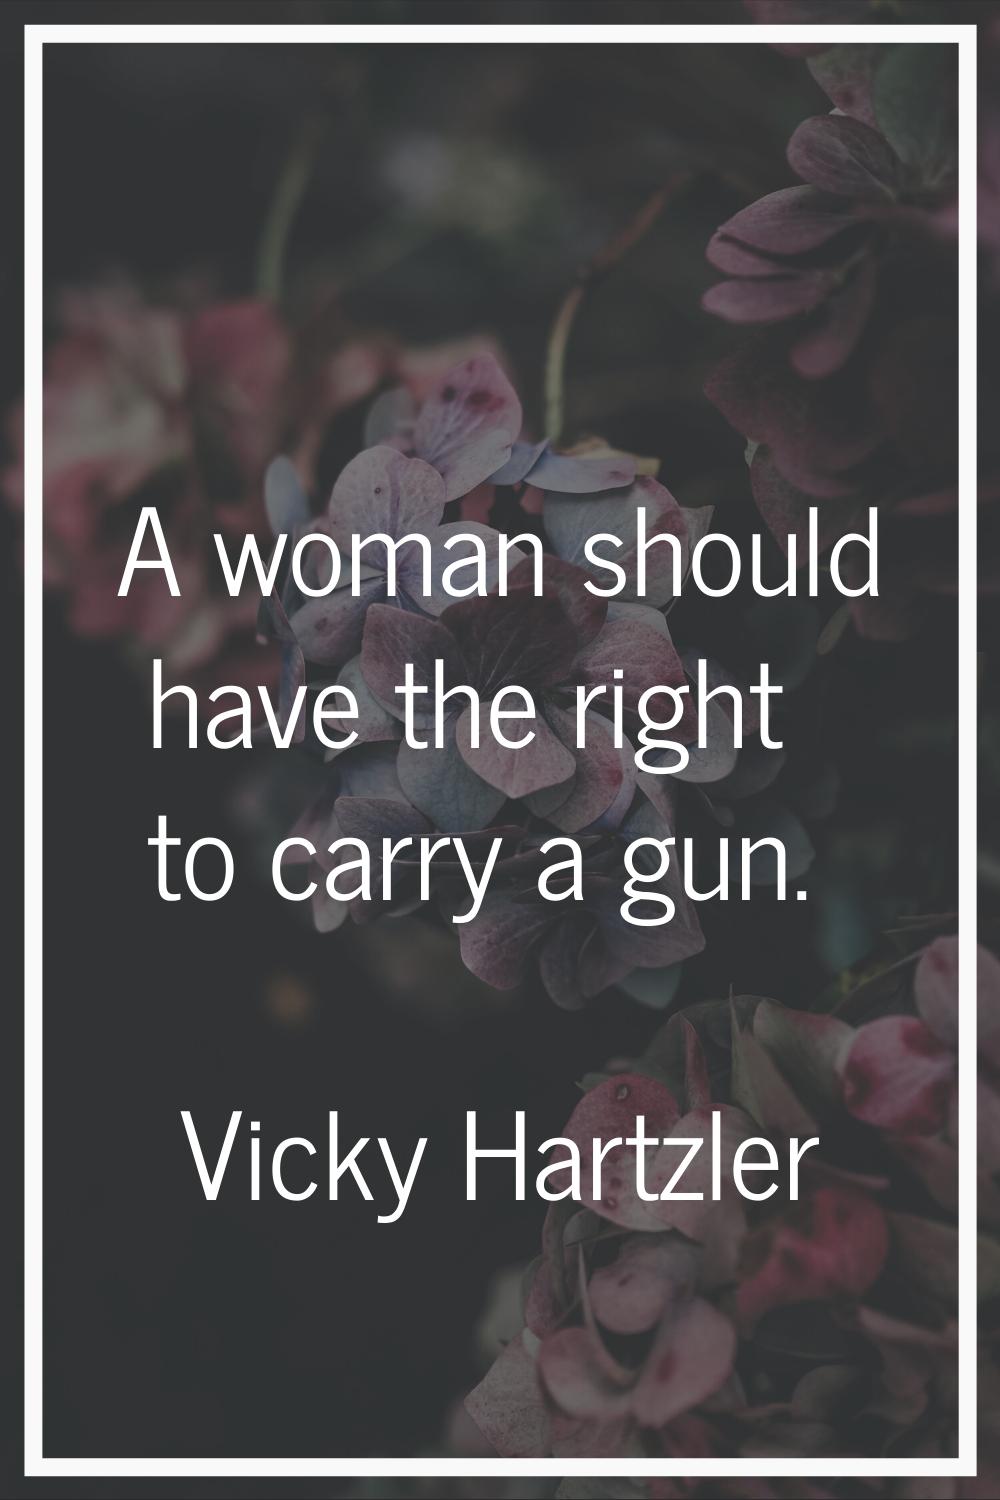 A woman should have the right to carry a gun.